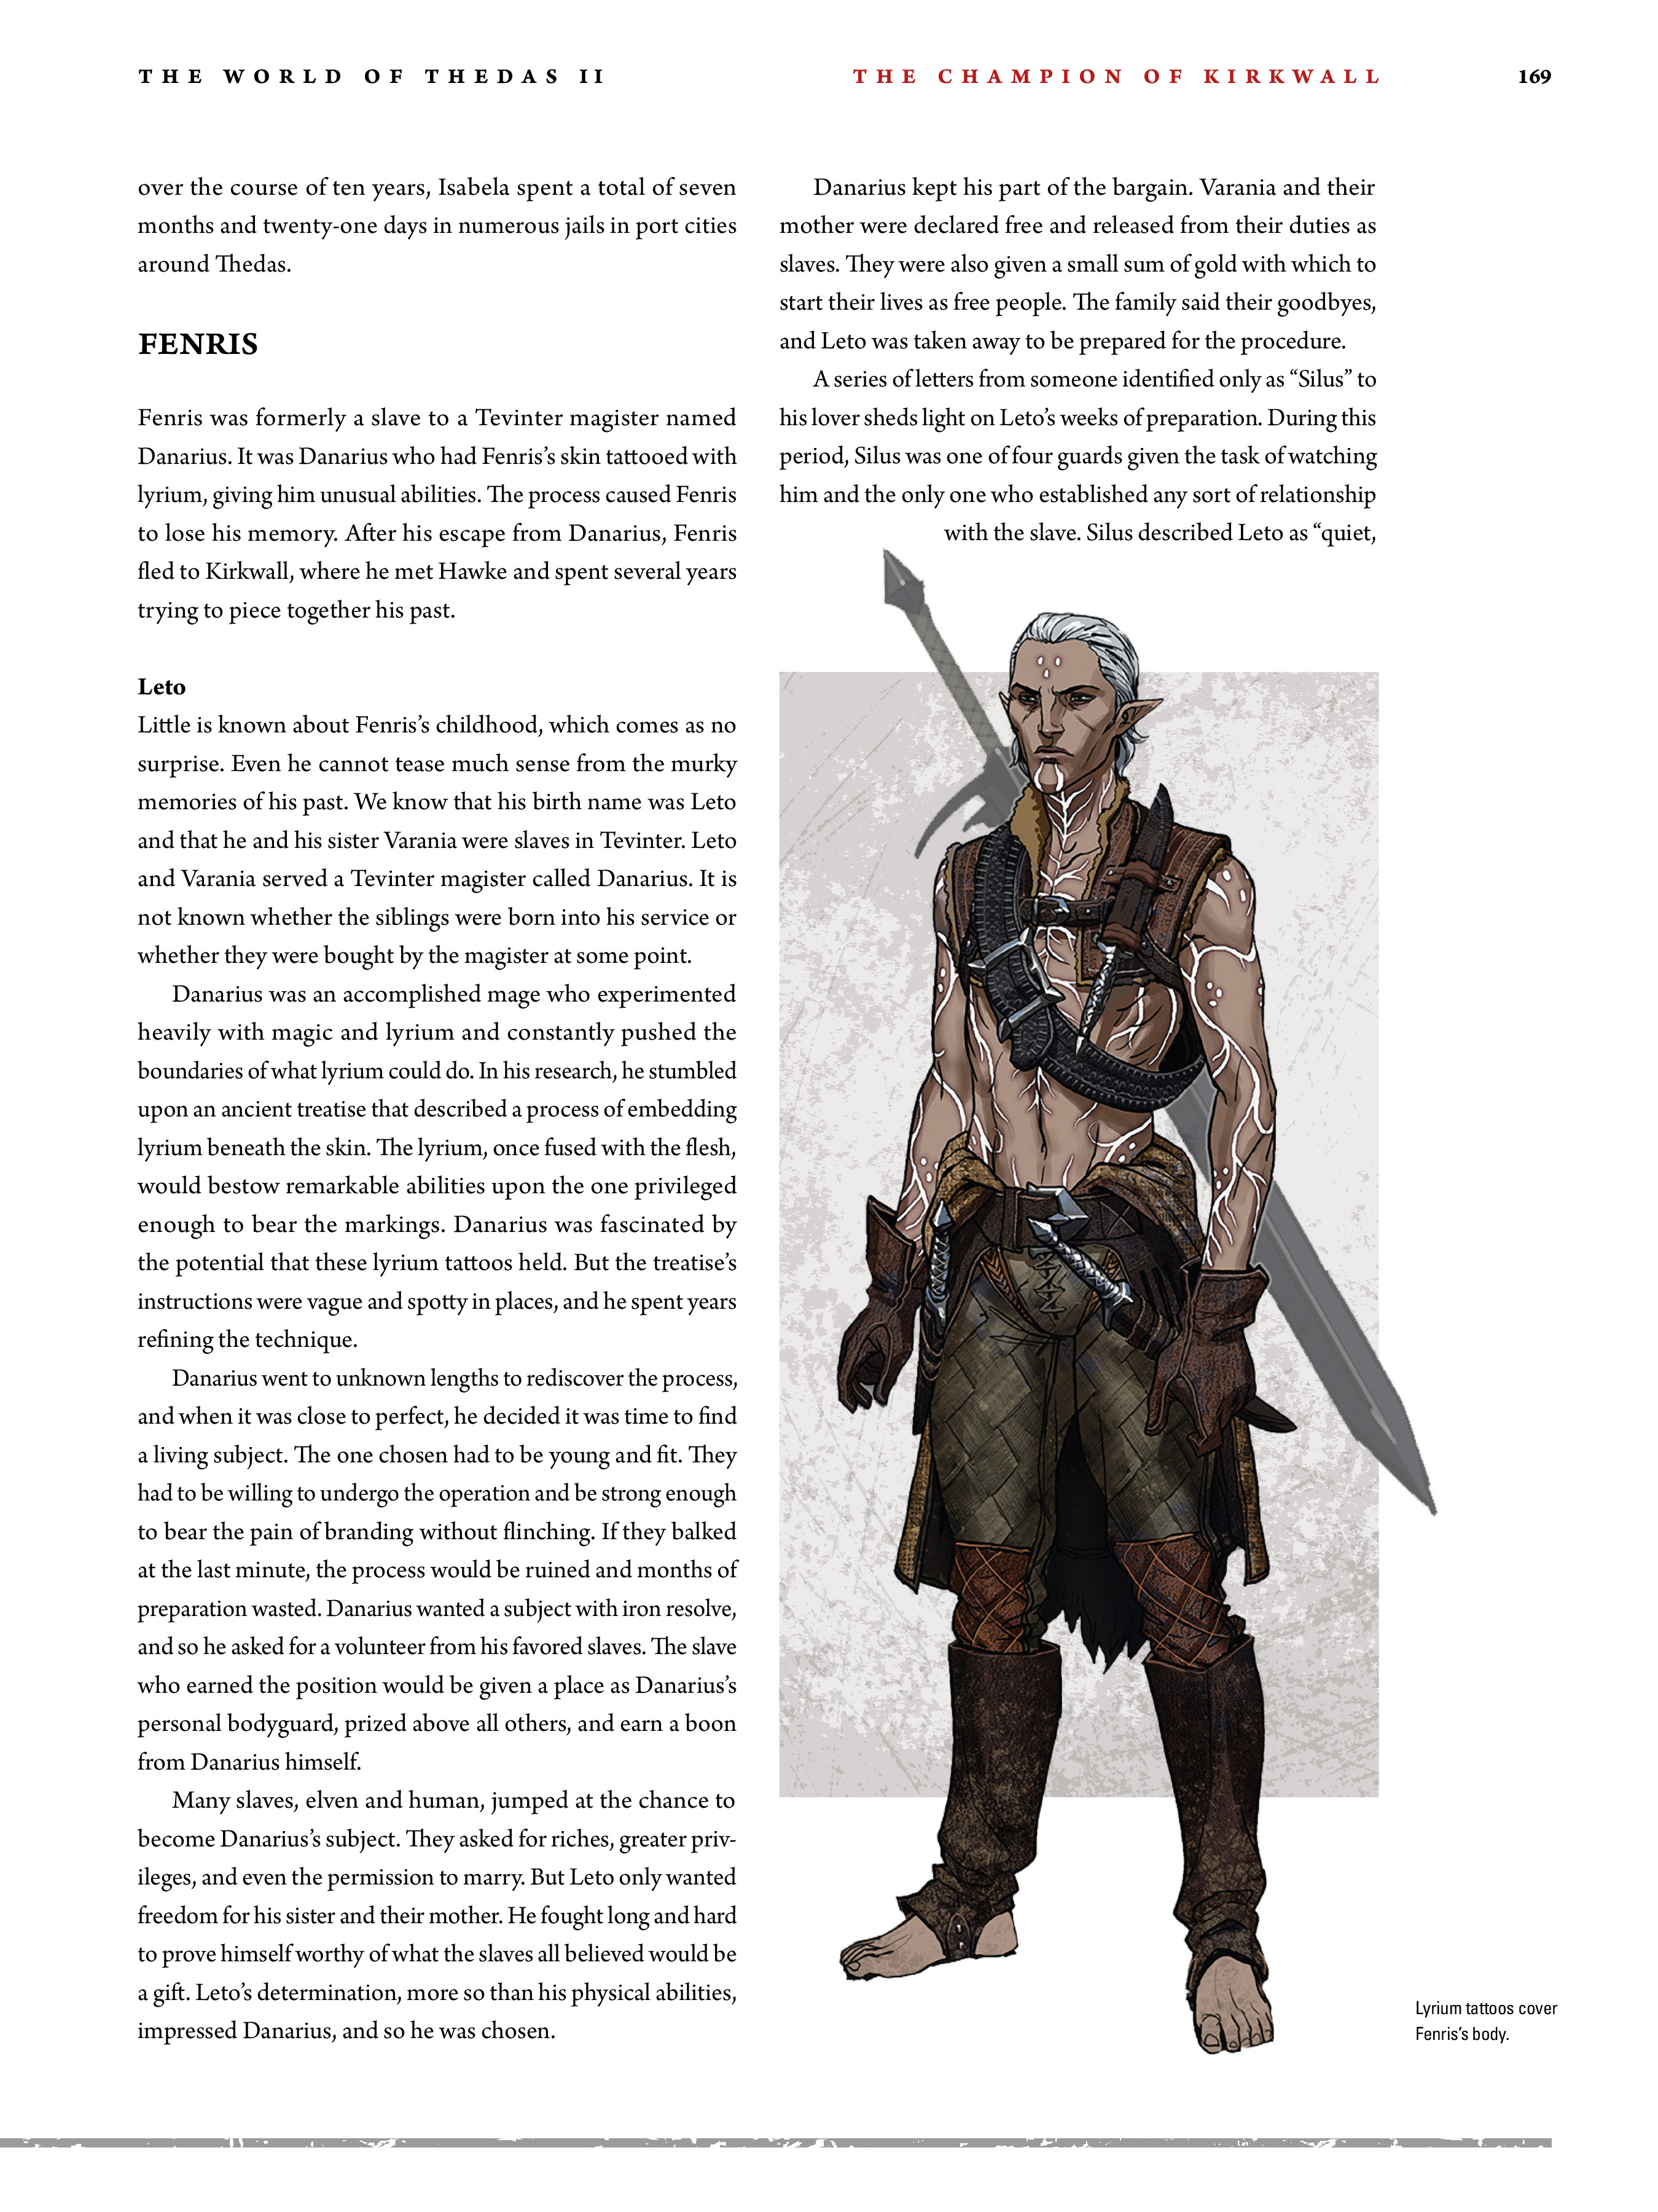 Read online Dragon Age: The World of Thedas comic -  Issue # TPB 2 - 164